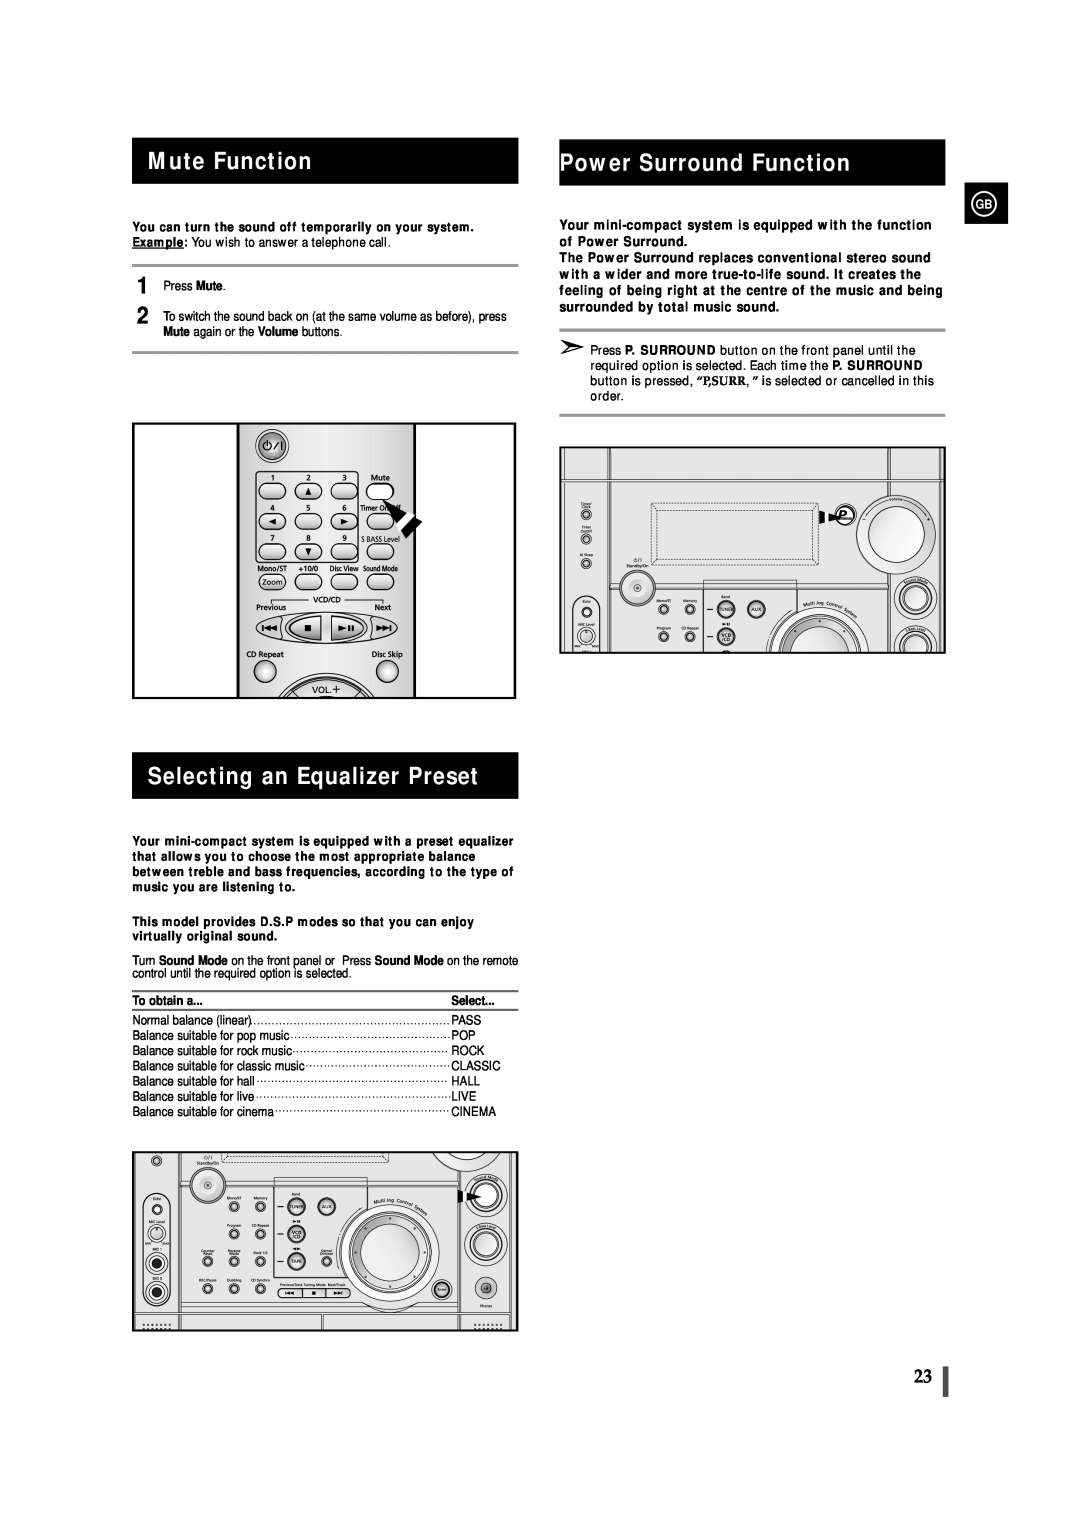 Samsung MAX-VS720 instruction manual Mute Function, Selecting an Equalizer Preset, Power Surround Function, To obtain a 